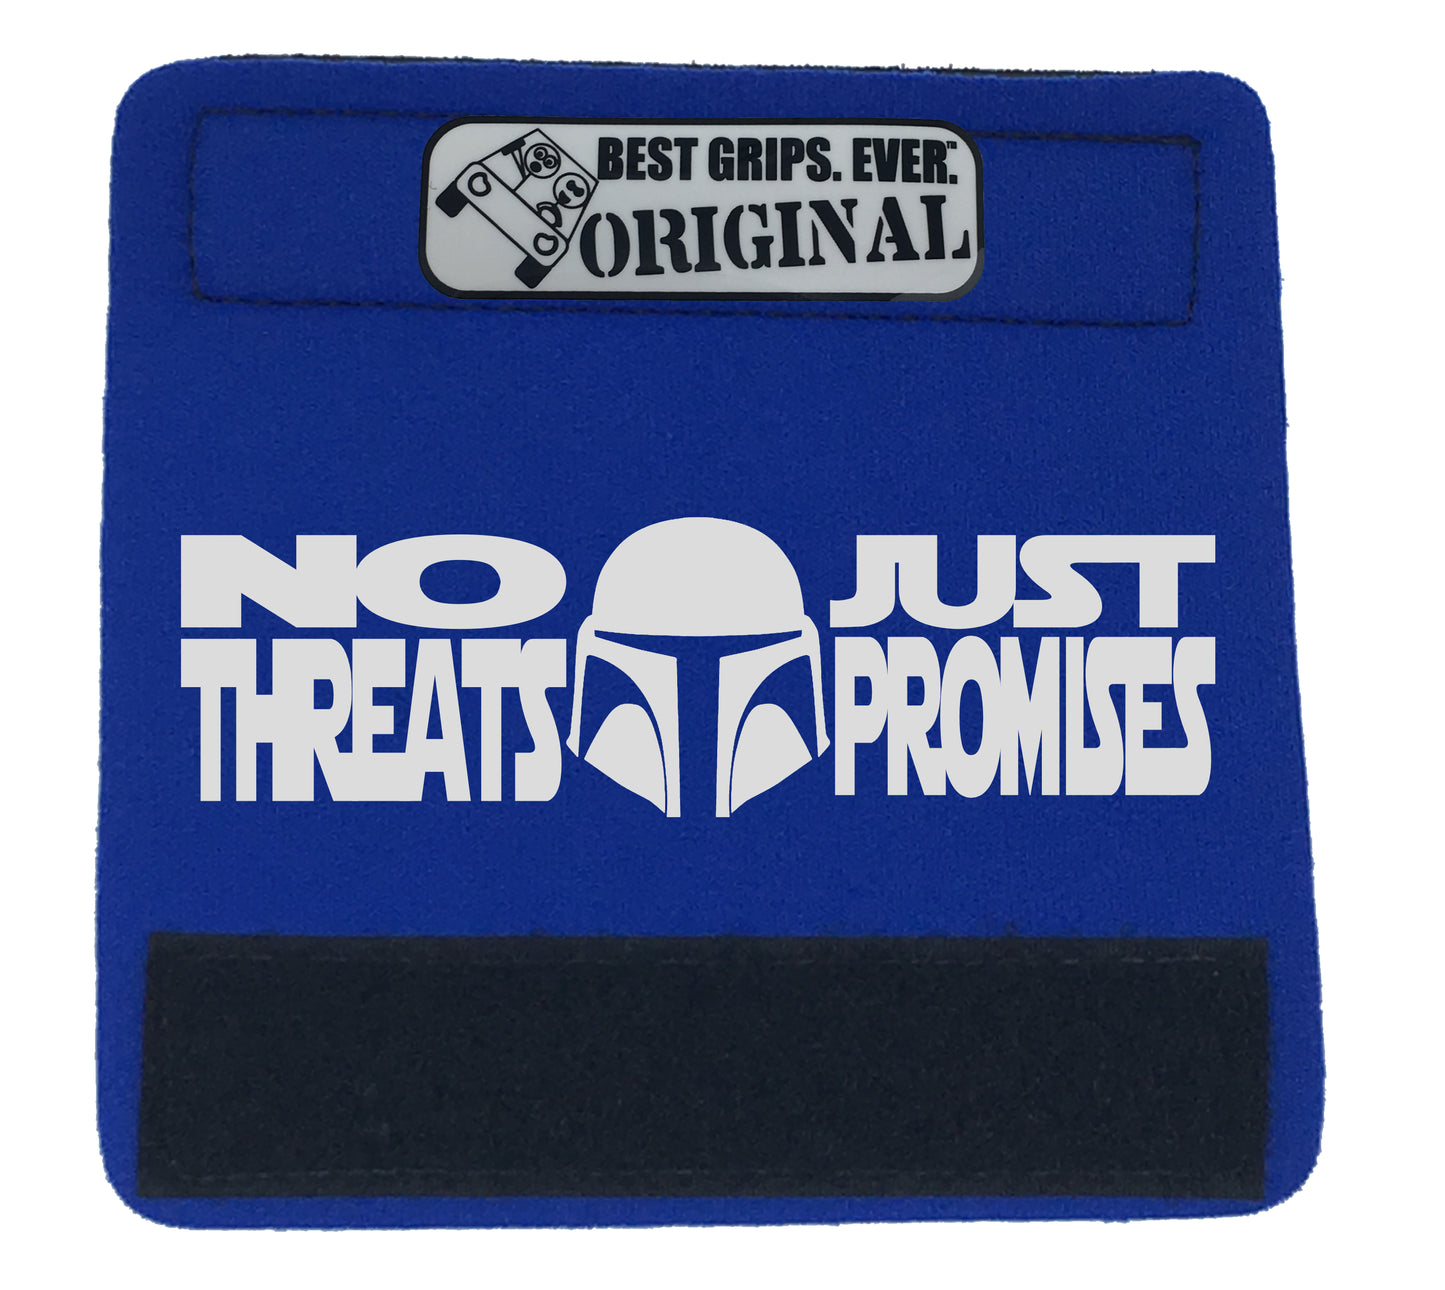 The Promises Grip. - BEST GRIPS. EVER.®